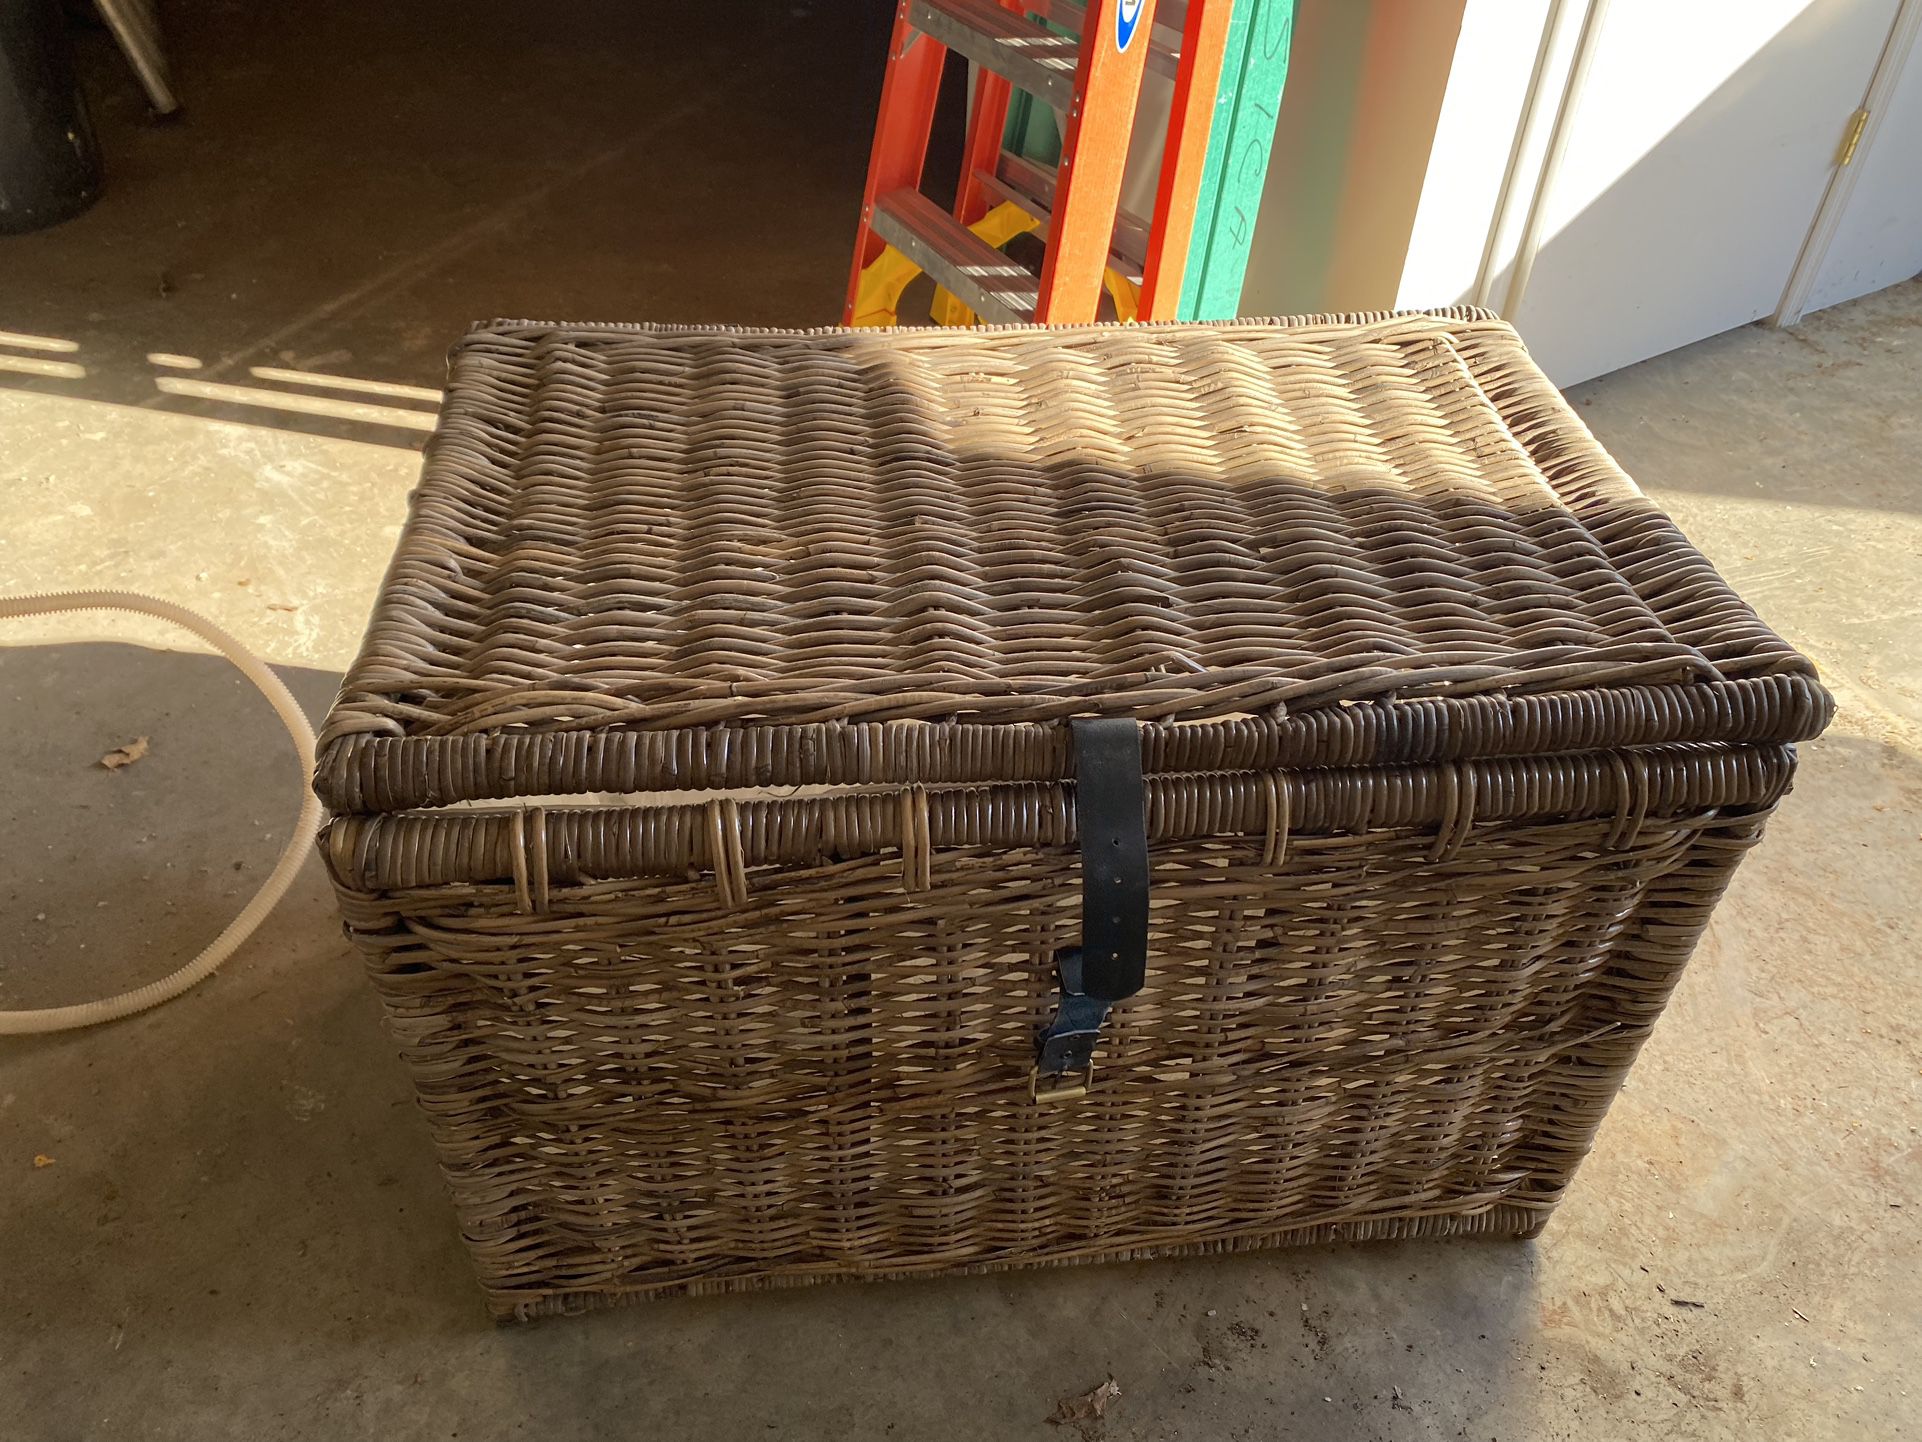 Wicker Storage Containers